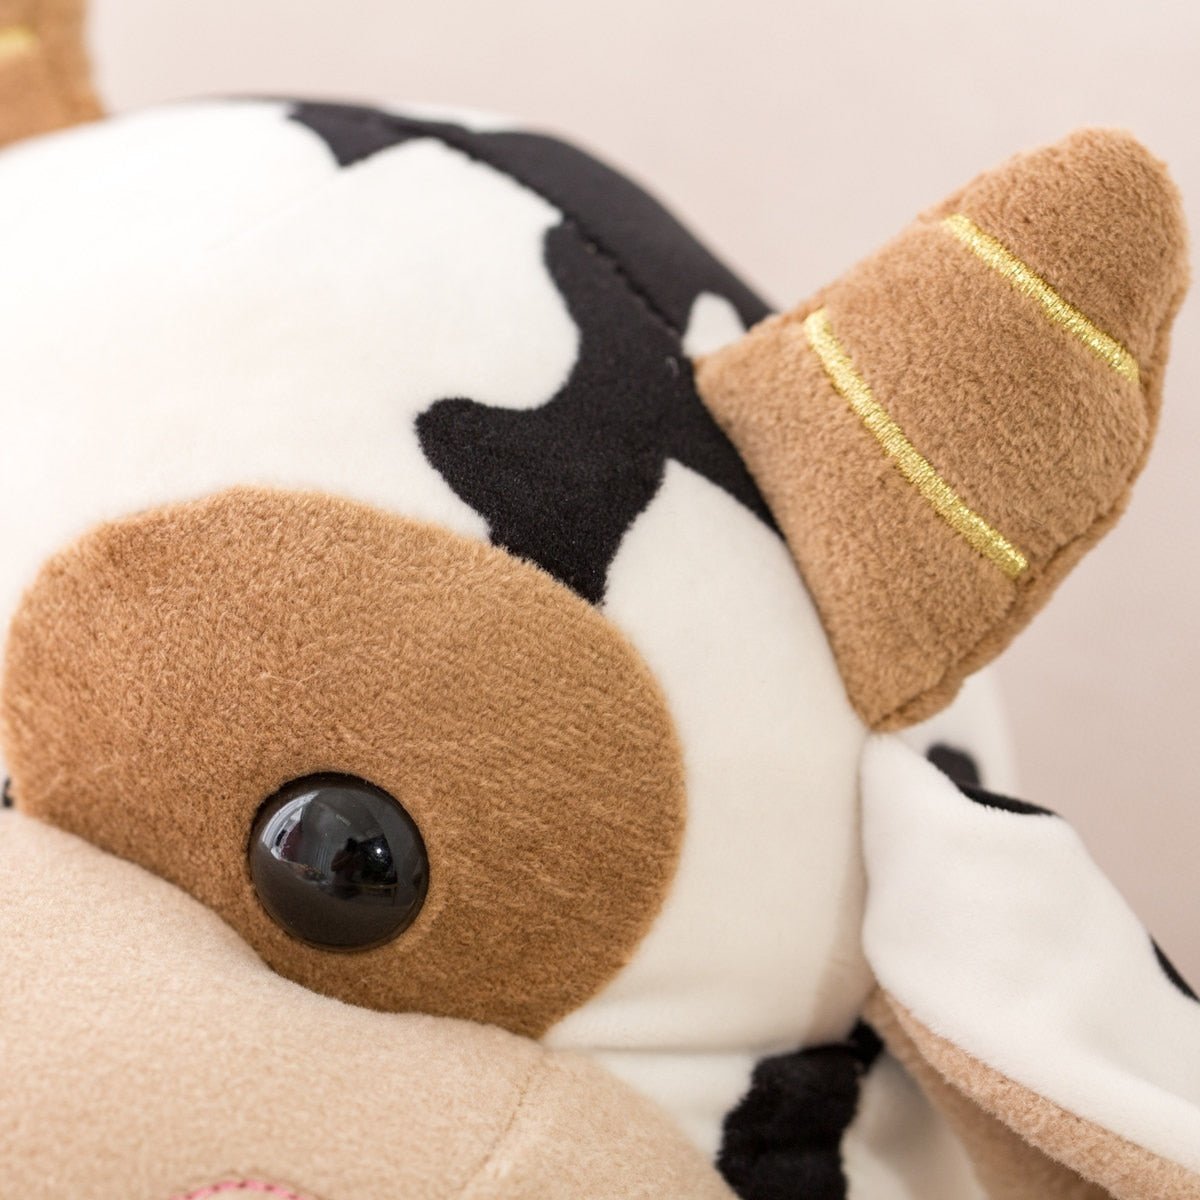 Plush Cow Toy - Perfect Gifts For Kids